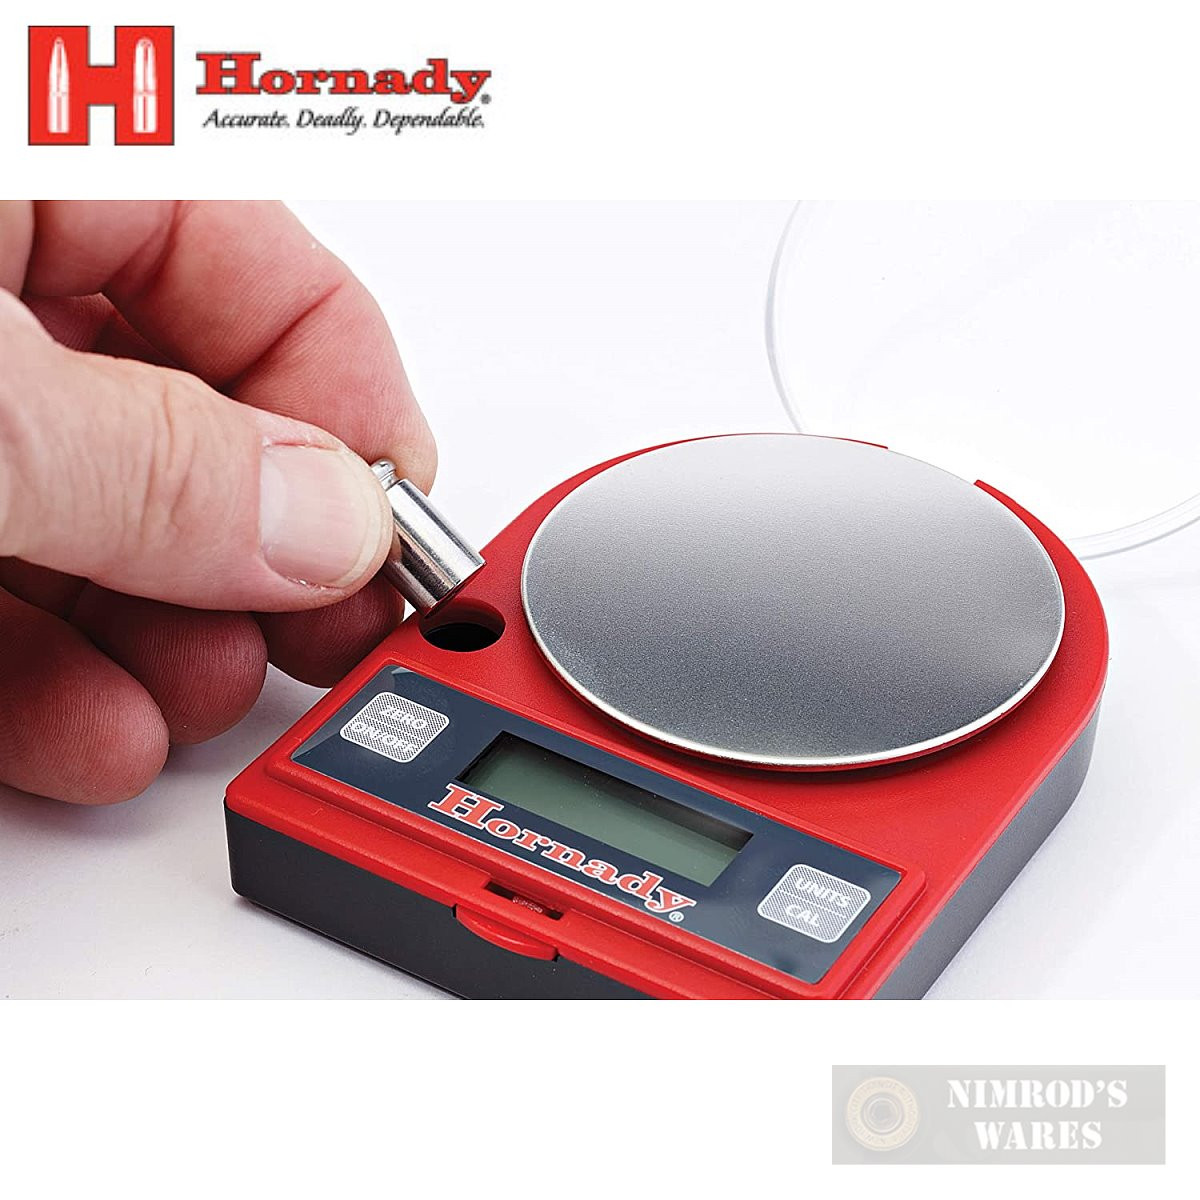 Hornady ELECTRONIC SCALE Reloading G2-1500 0.10 Grain Accuracy